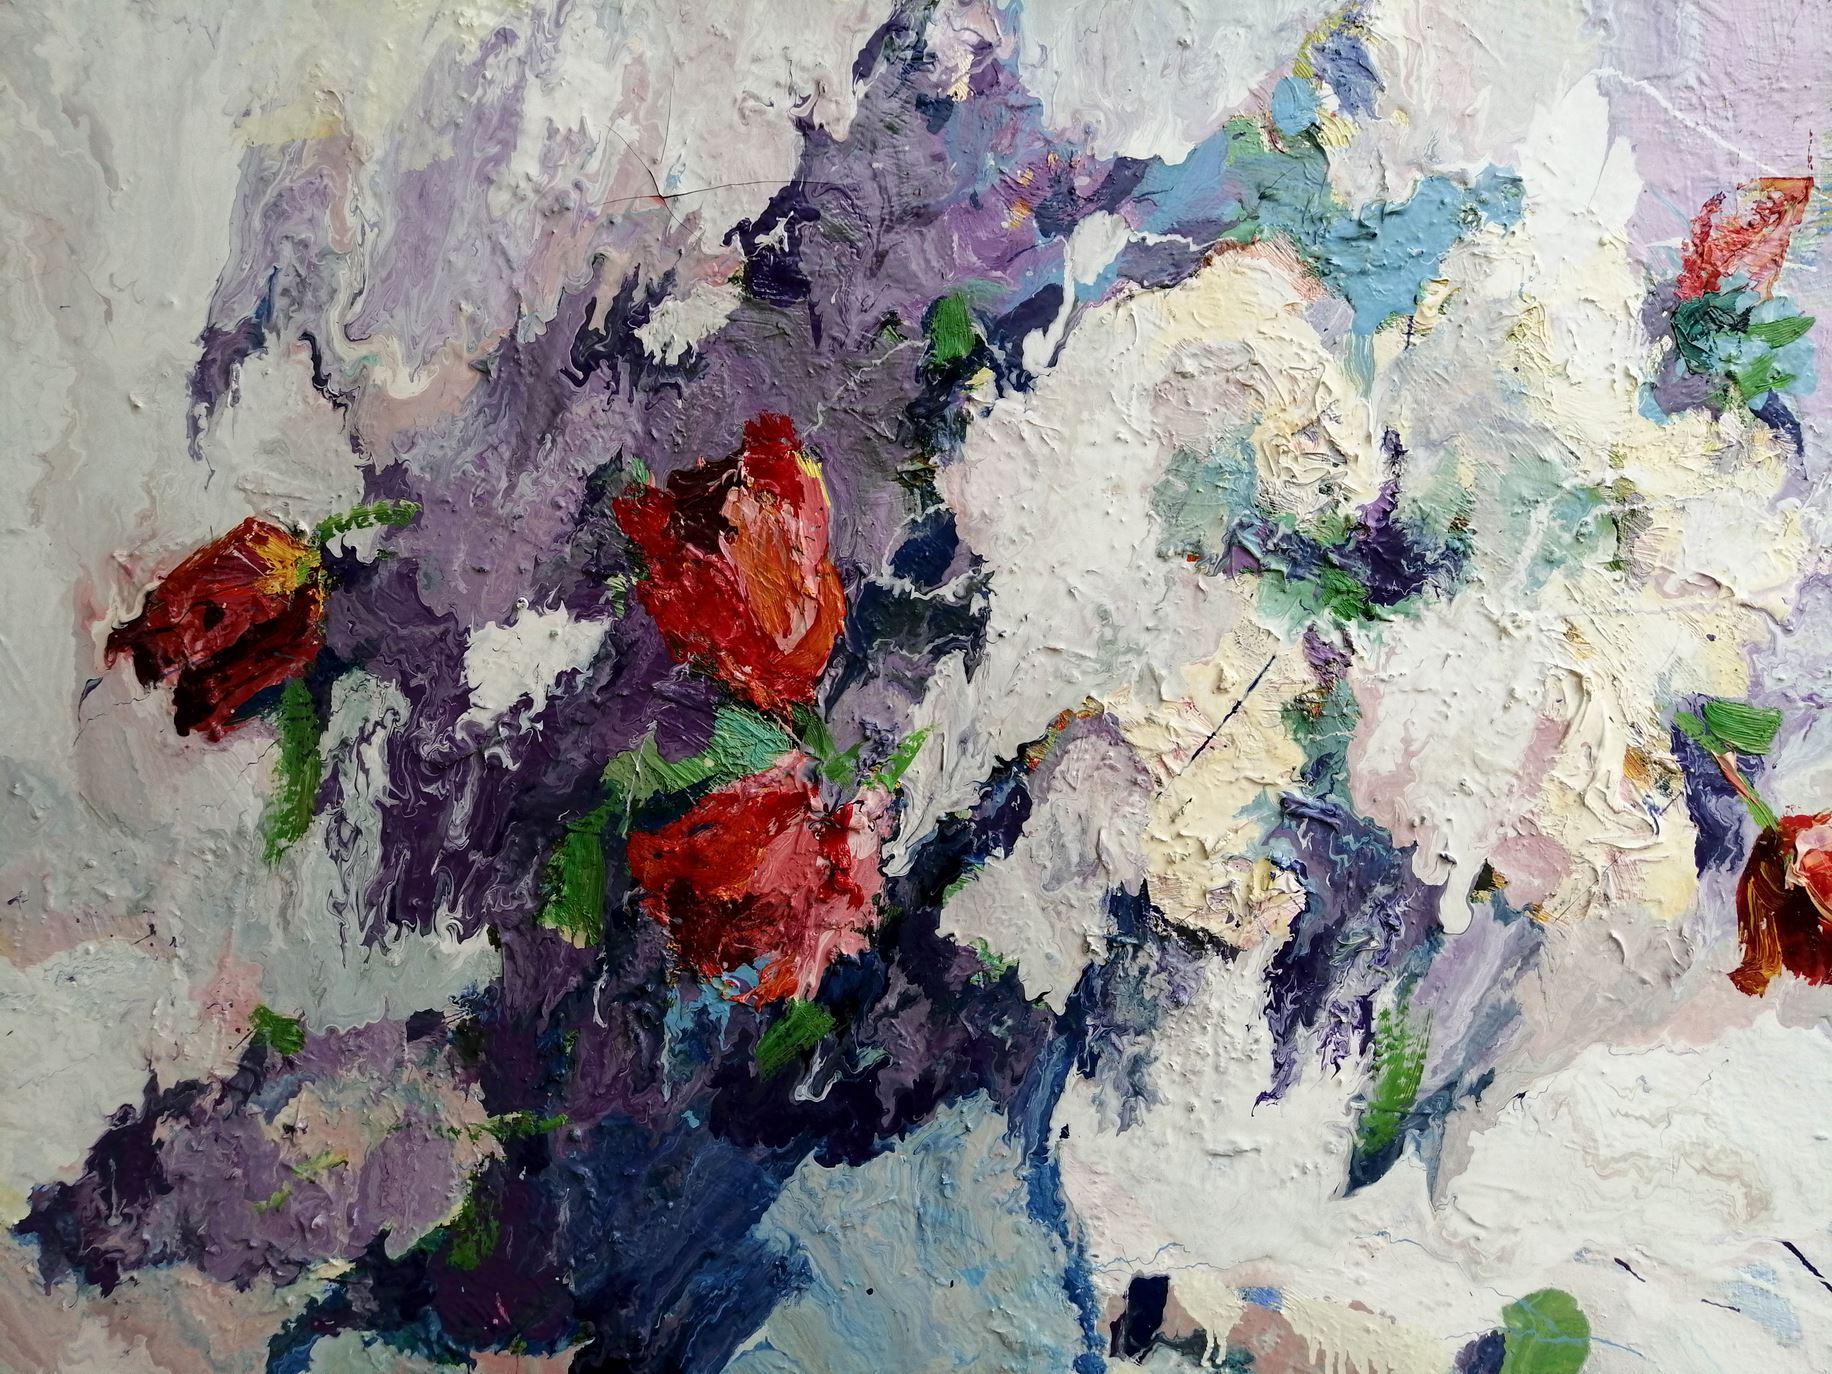 Artist: Alex Kalenyuk 
Work: Original oil painting, handmade artwork, one of a kind 
Medium: Oil on canvas 
Year: 2020
Style: Impressionism
Title: Bouquet of Flowers, 
Size: 27.5